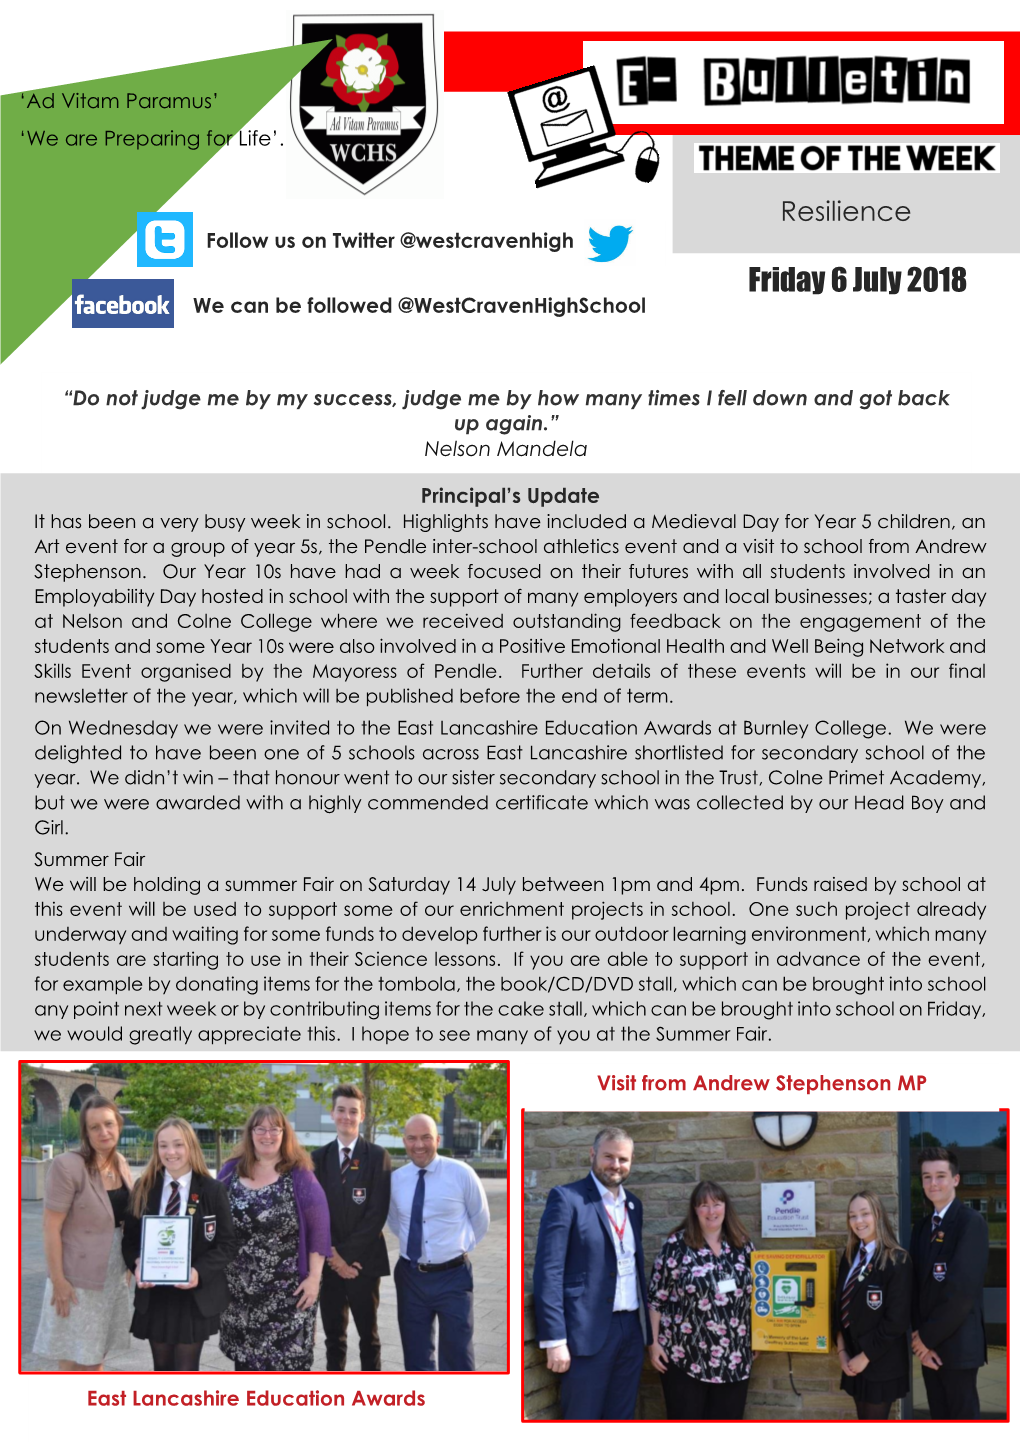 Friday 6 July 2018 We Can Be Followed @Westcravenhighschool